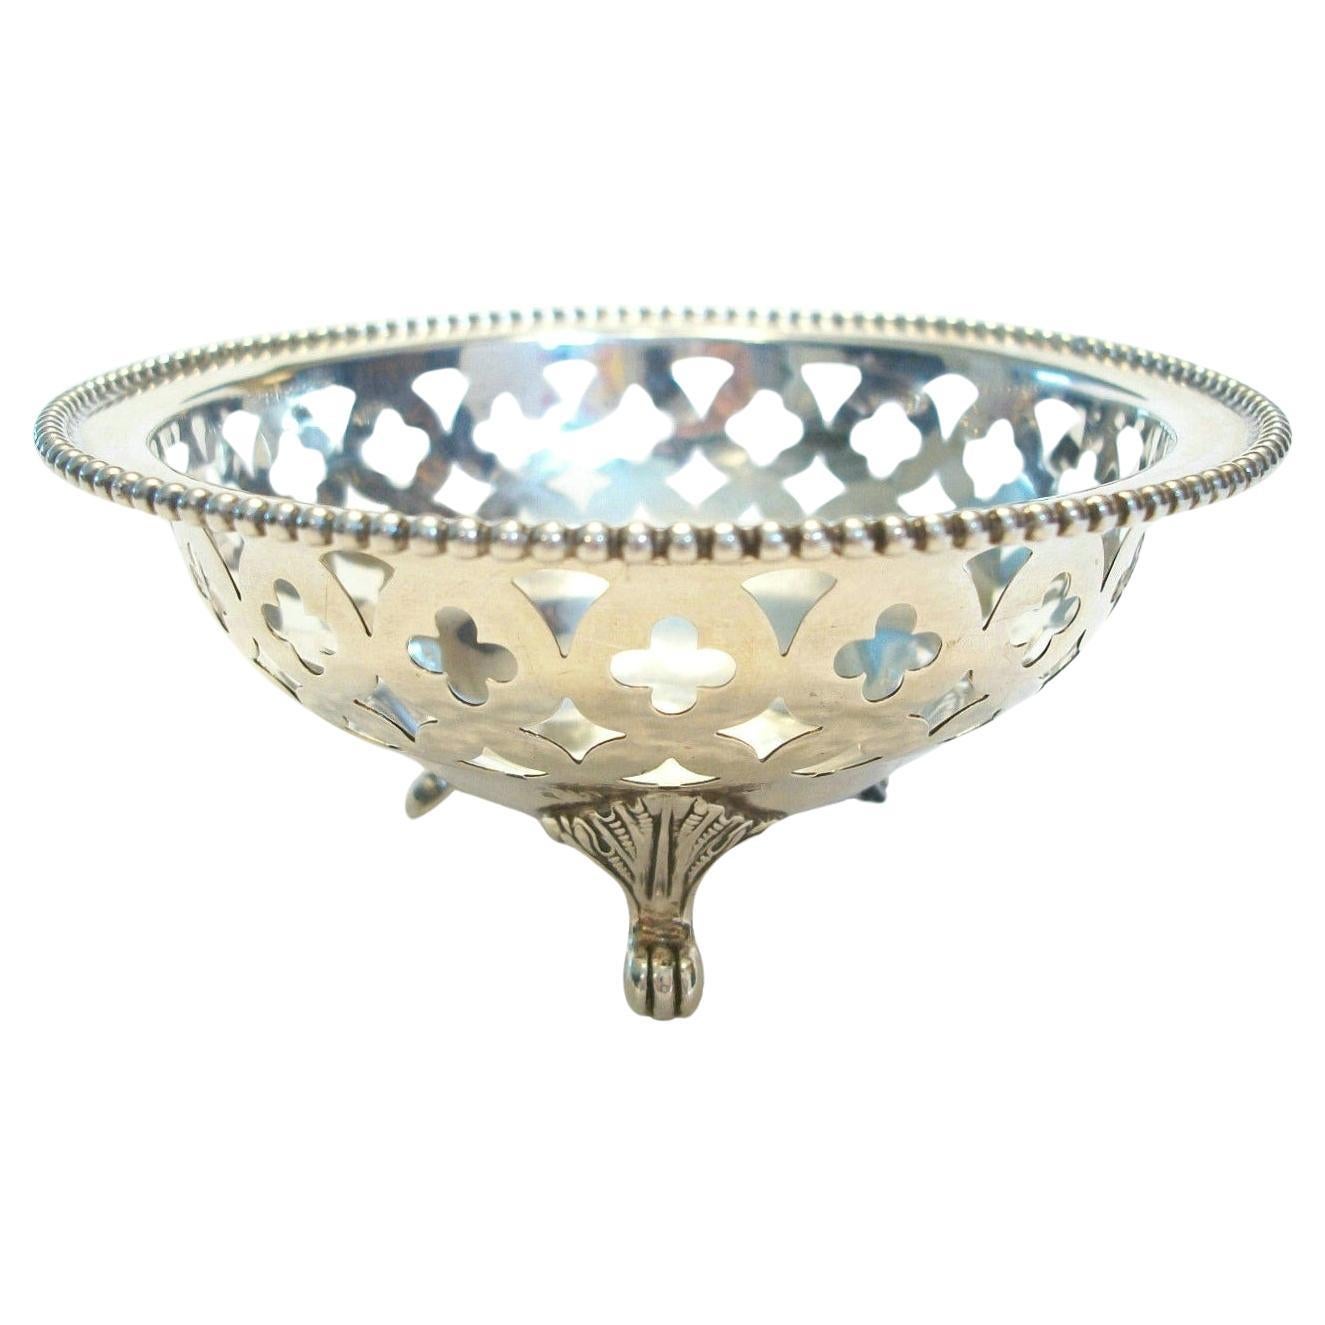 RYRIE BROS. - Pierced Sterling Silver Bonbon Dish - Canada - Early 20th Century For Sale